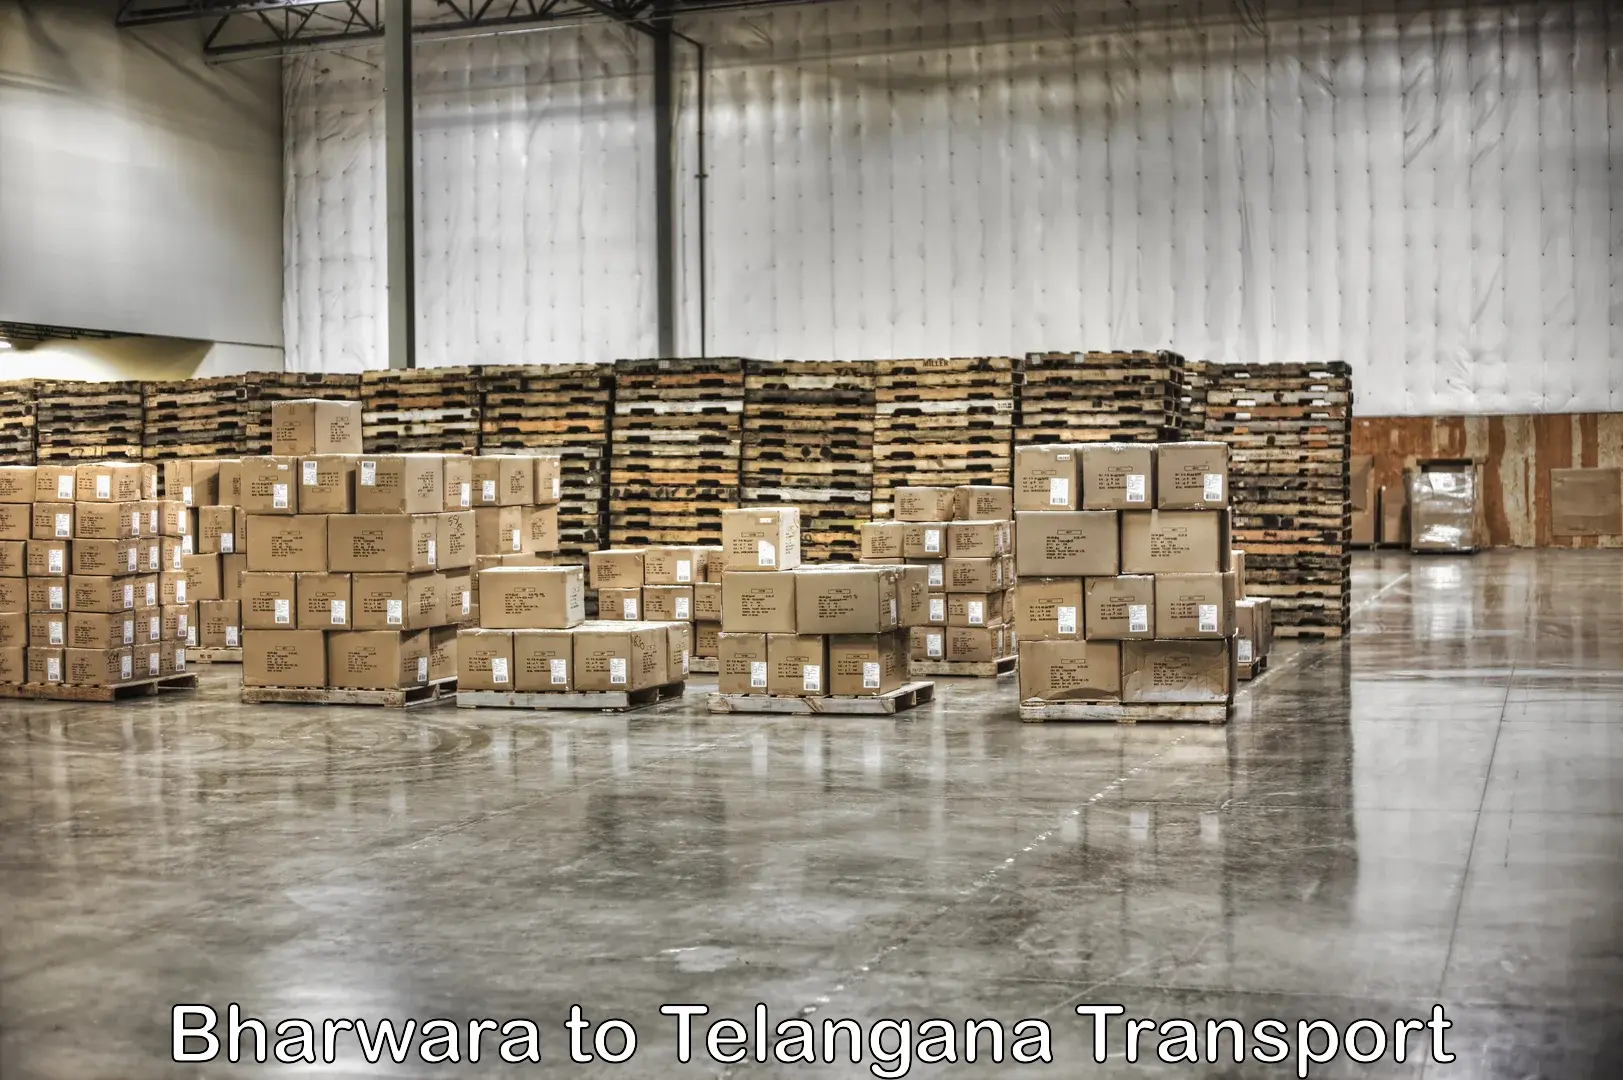 Container transport service Bharwara to Sathupally